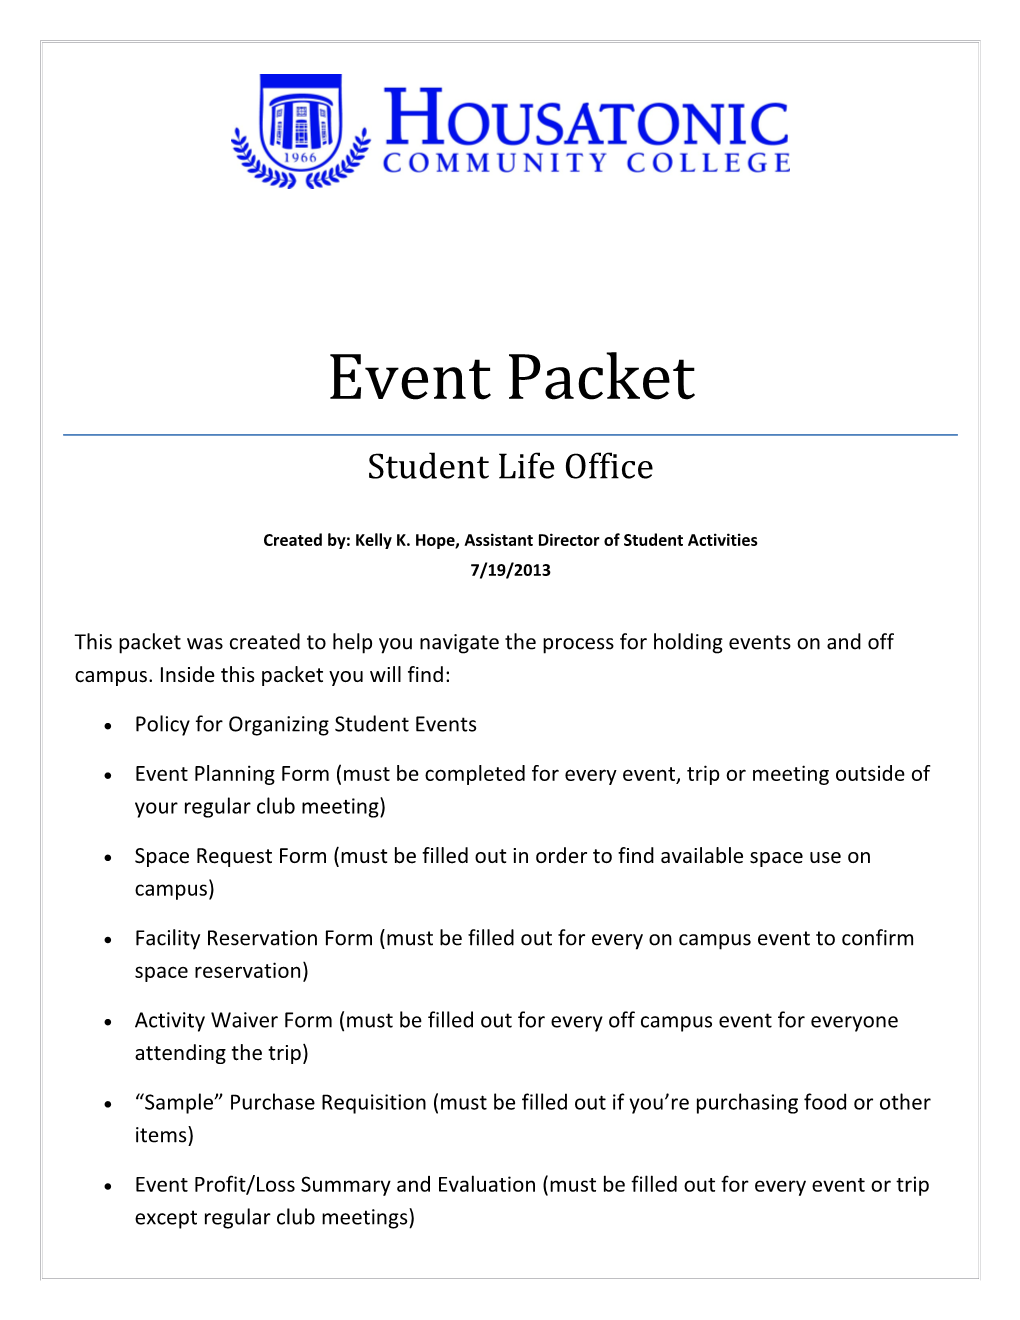 This Packet Was Created to Help You Navigate the Process for Holding Events on and Off